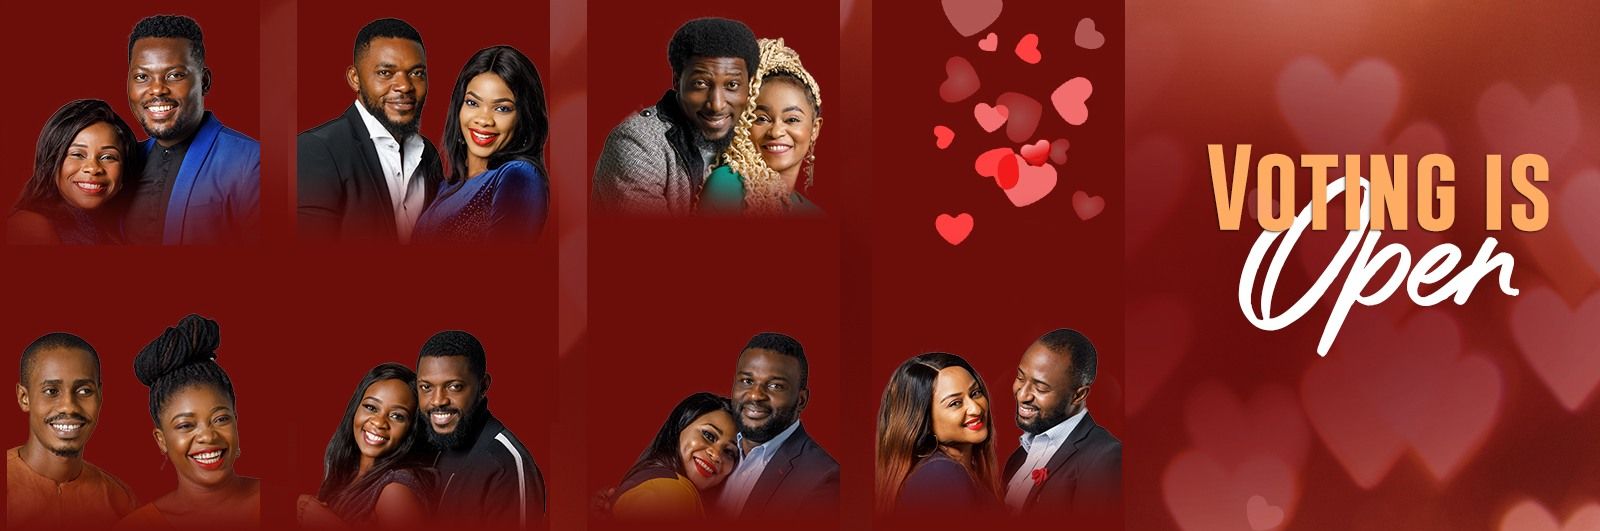 Ultimate Love 2020 This Week - Seven Couples nominated